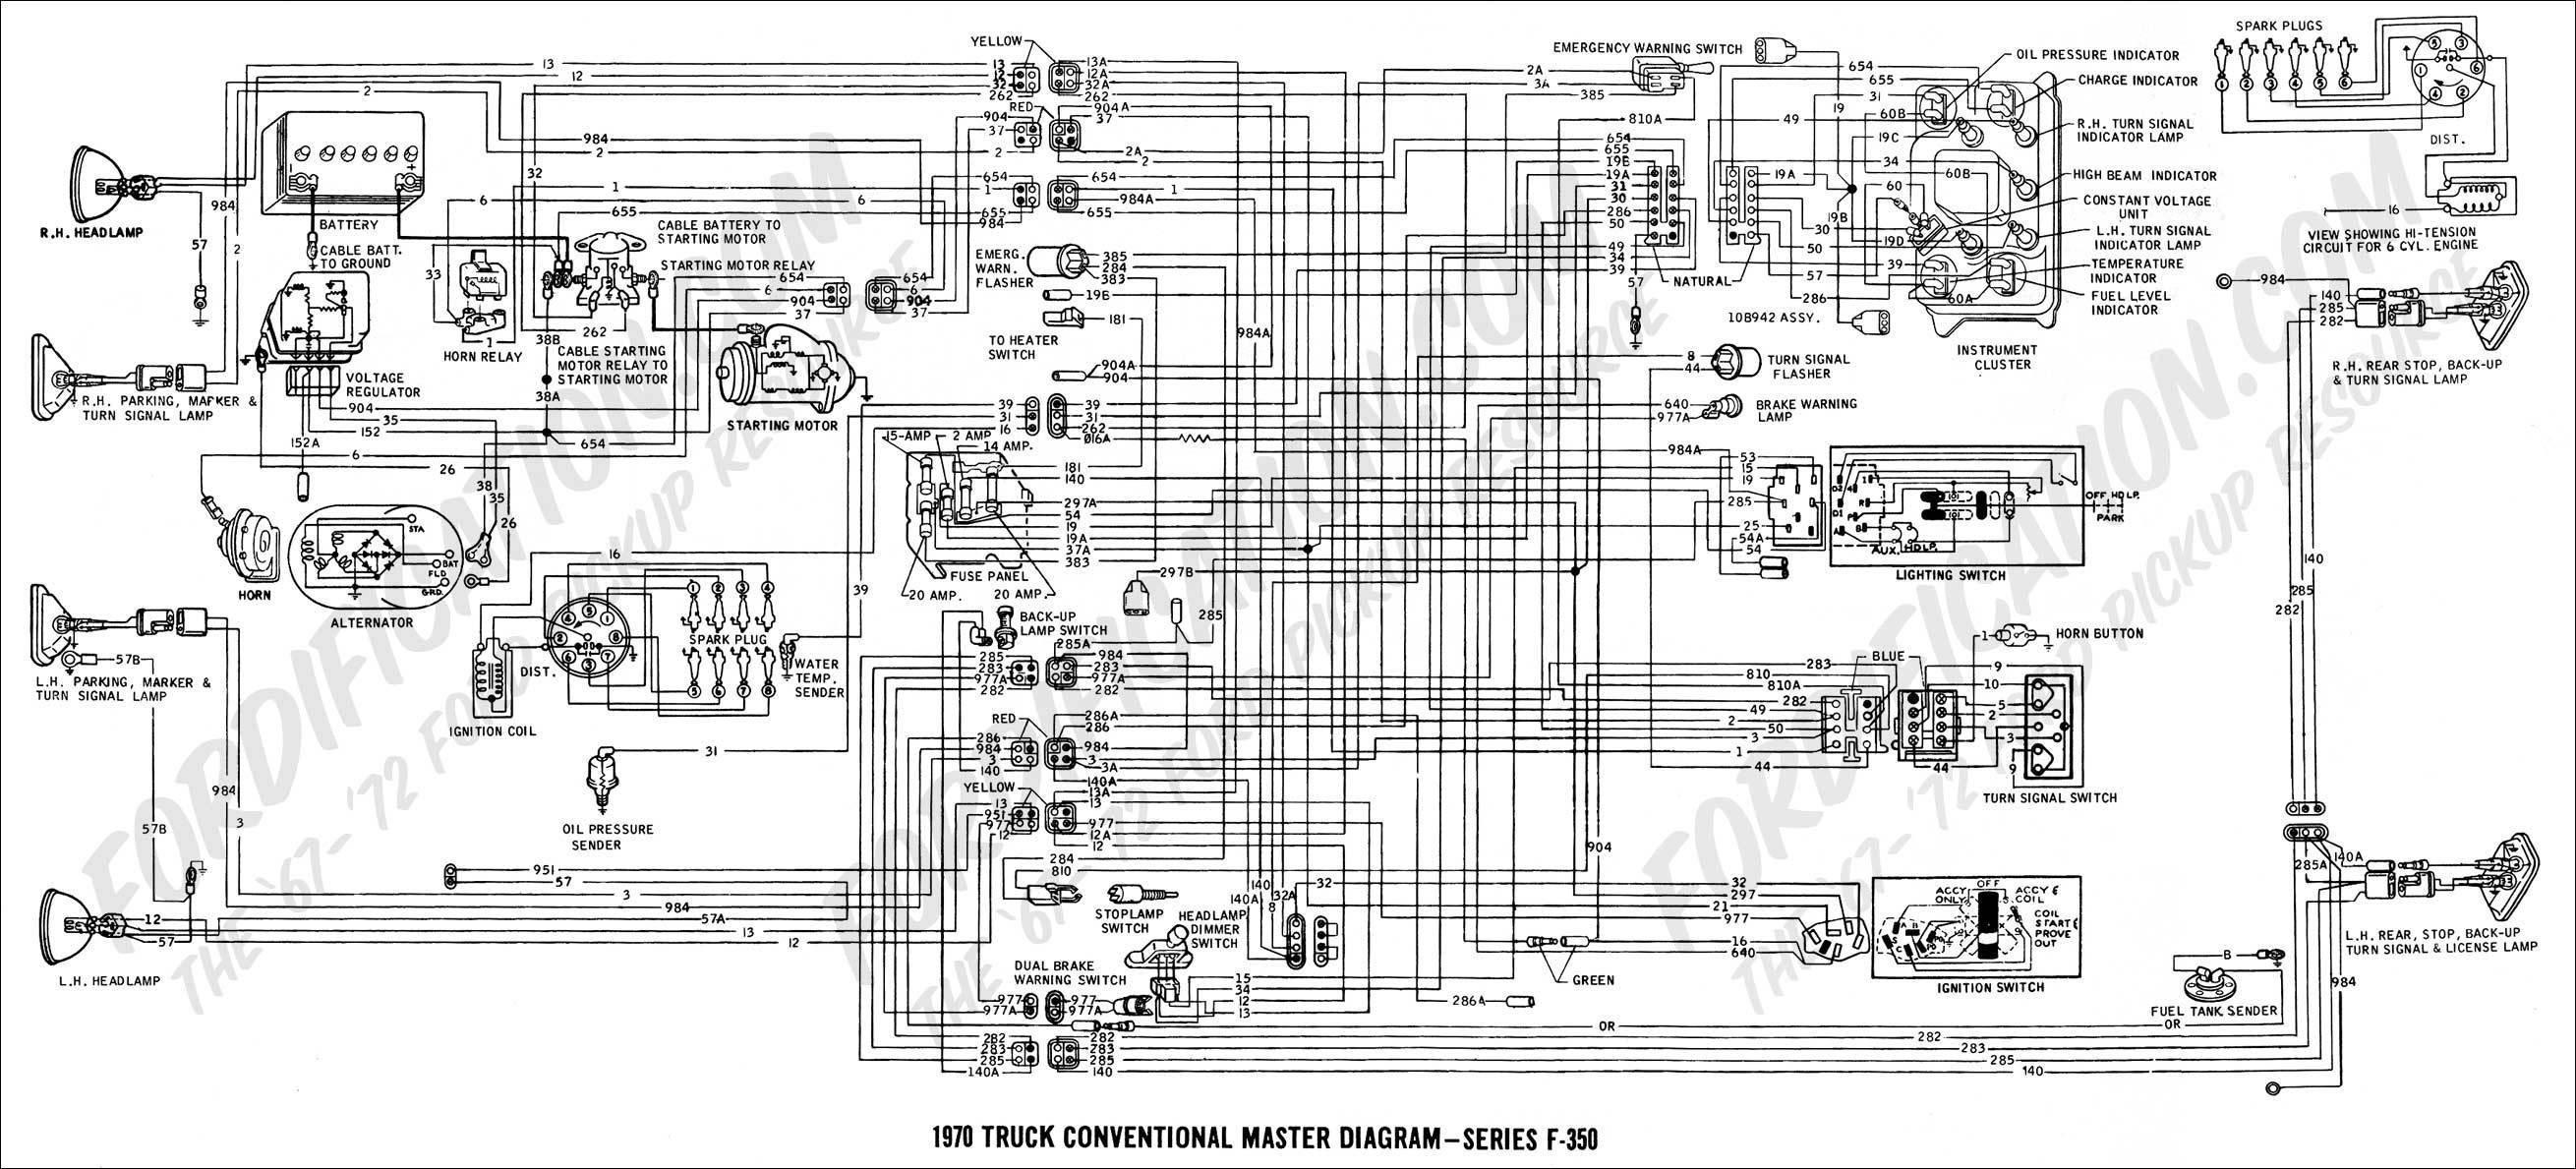 2003 ford f250 wiring diagram trusted wiring diagram rh dafpods co 2015 Ford F 250